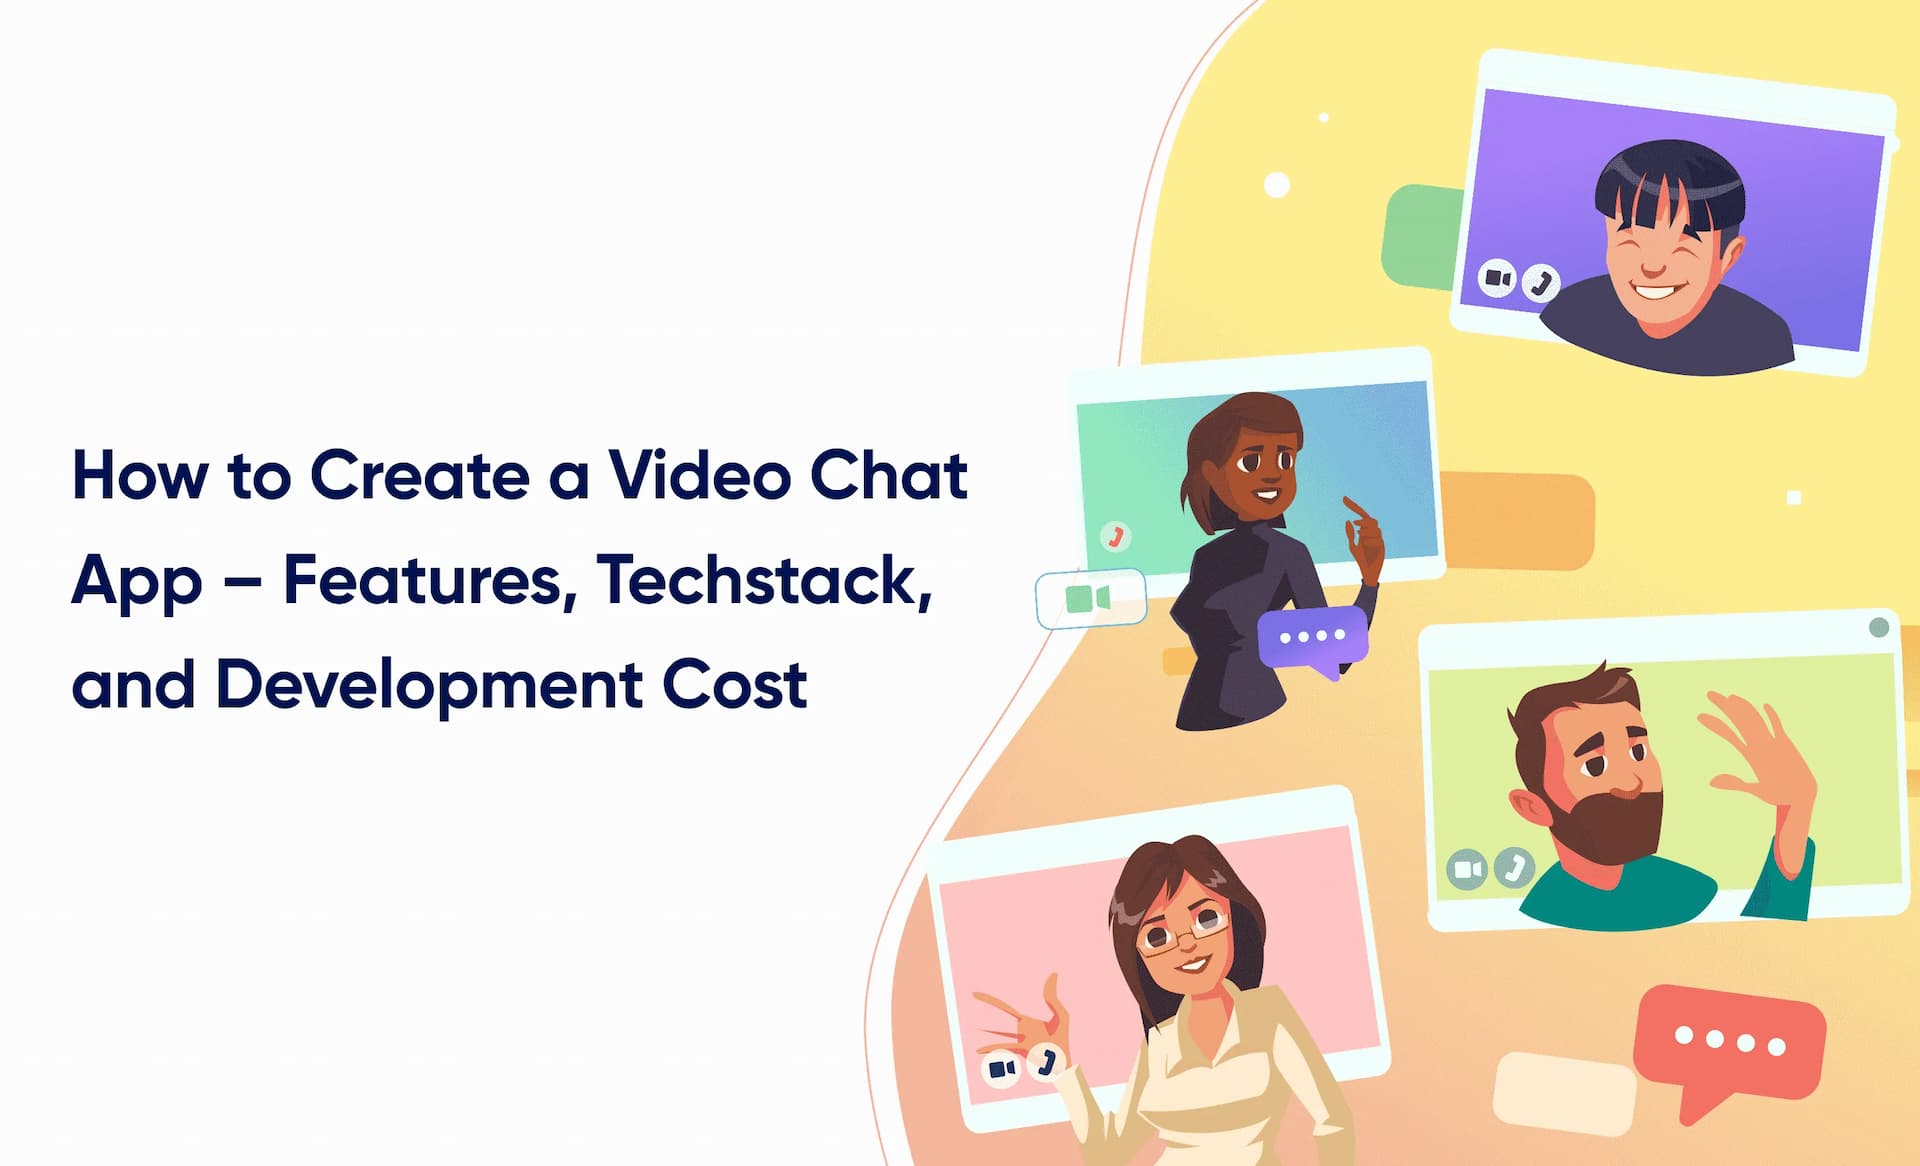 How to Create a Video Chat App – Features, Techstack, and Development Cost